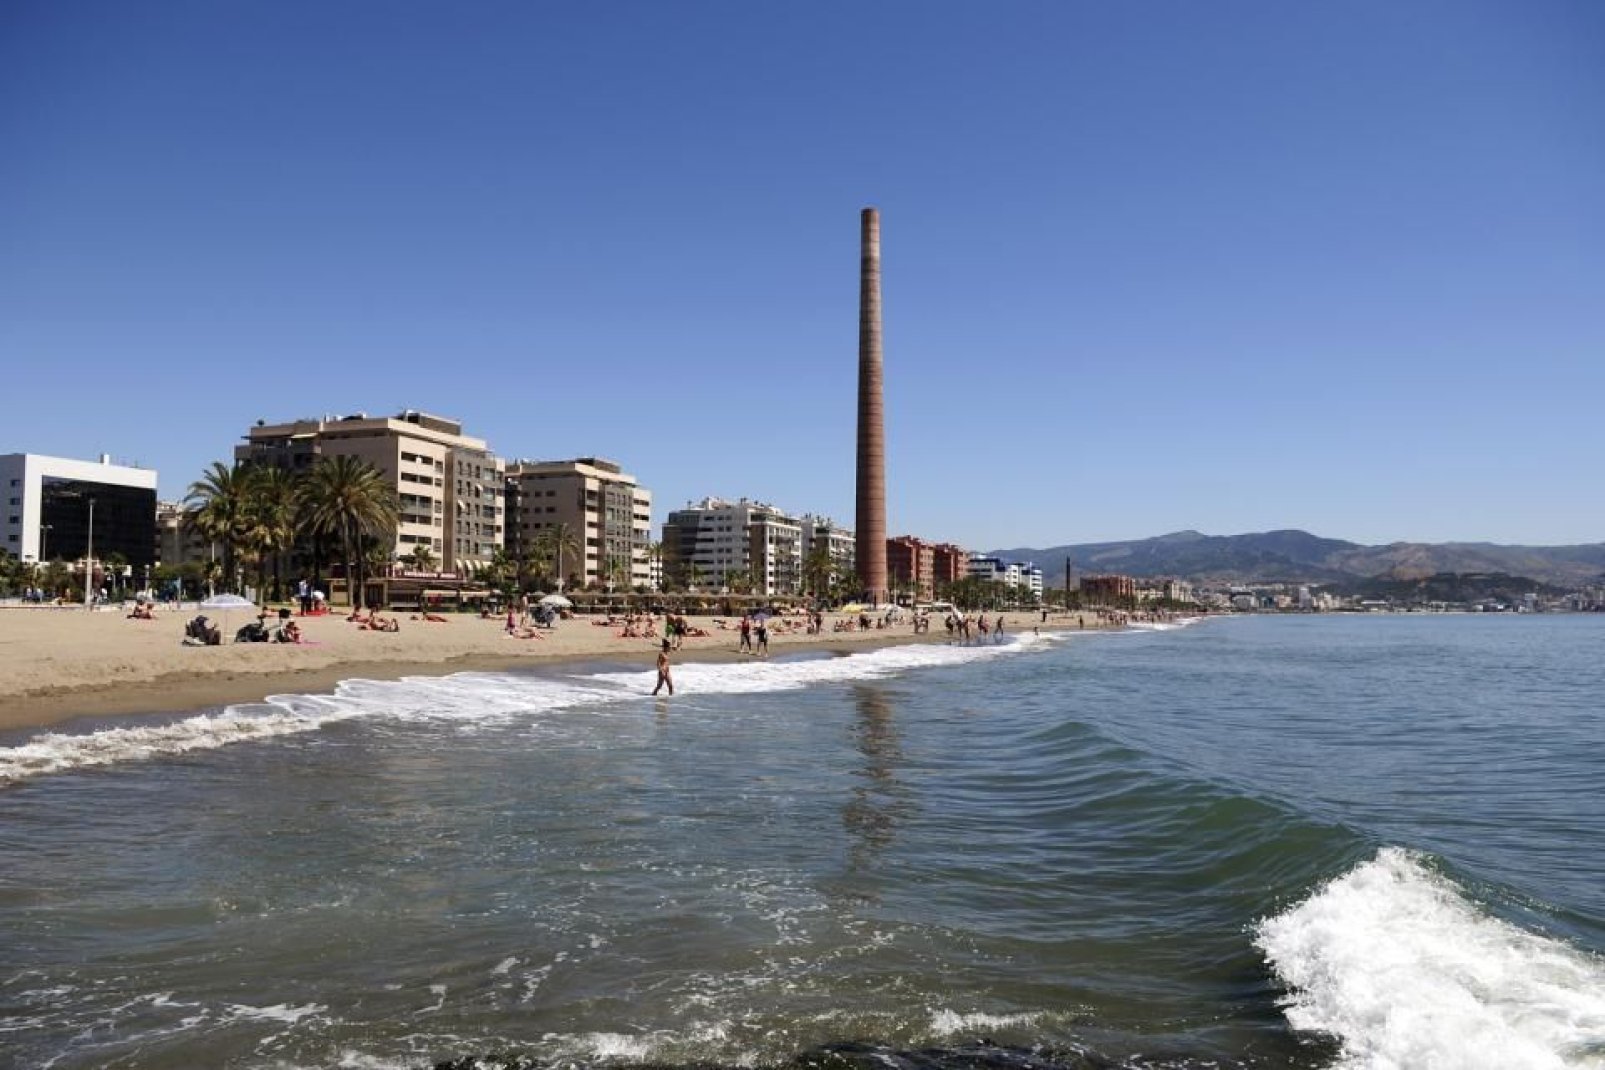 Malaga is one of the biggest tourist destinations in Spain, mostly thanks to its various beaches.